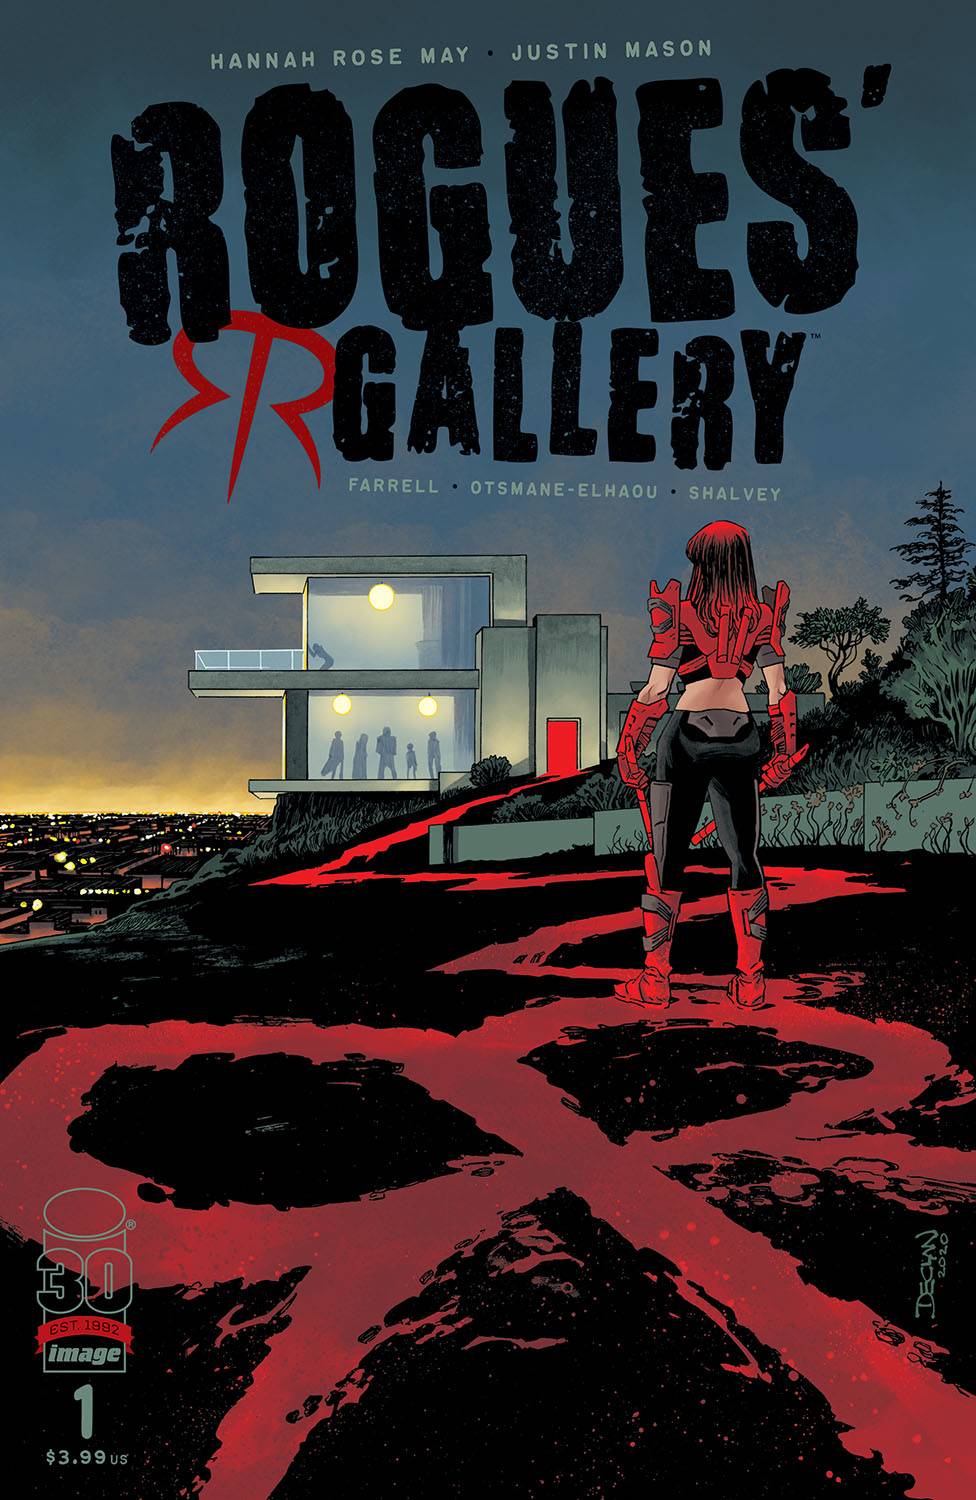 Exclusive Interview With Rogues Gallery Creators Hannah Rose May & Justin Mason!